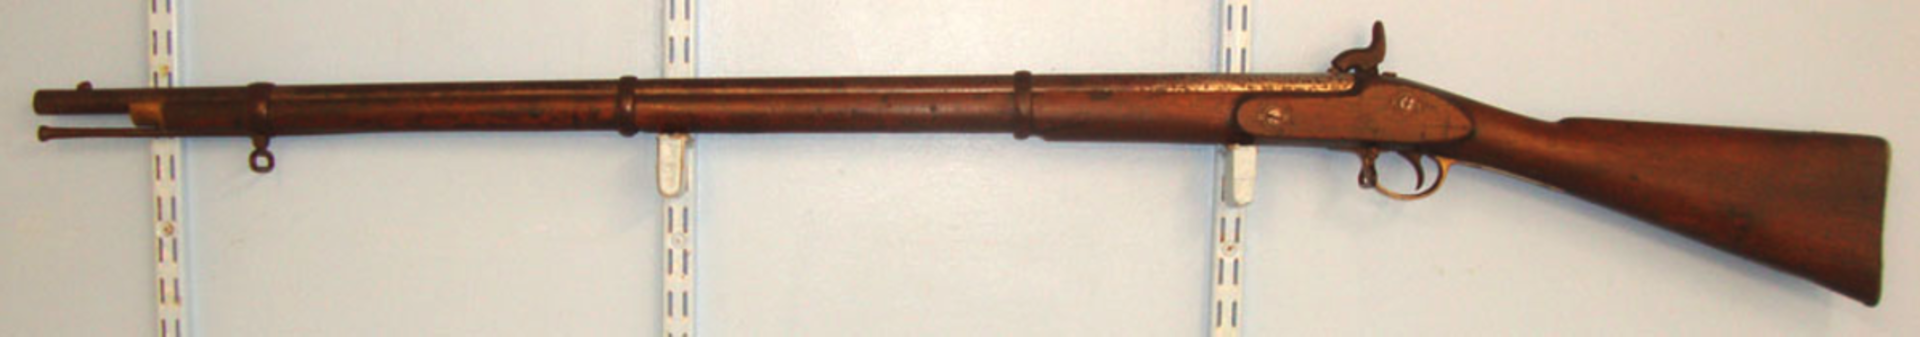 British Crimean War 1855 Dated Enfield Tower 3 Band .577 Percussion Rifle Regiment ‘V Drb2 50’. - Image 2 of 3